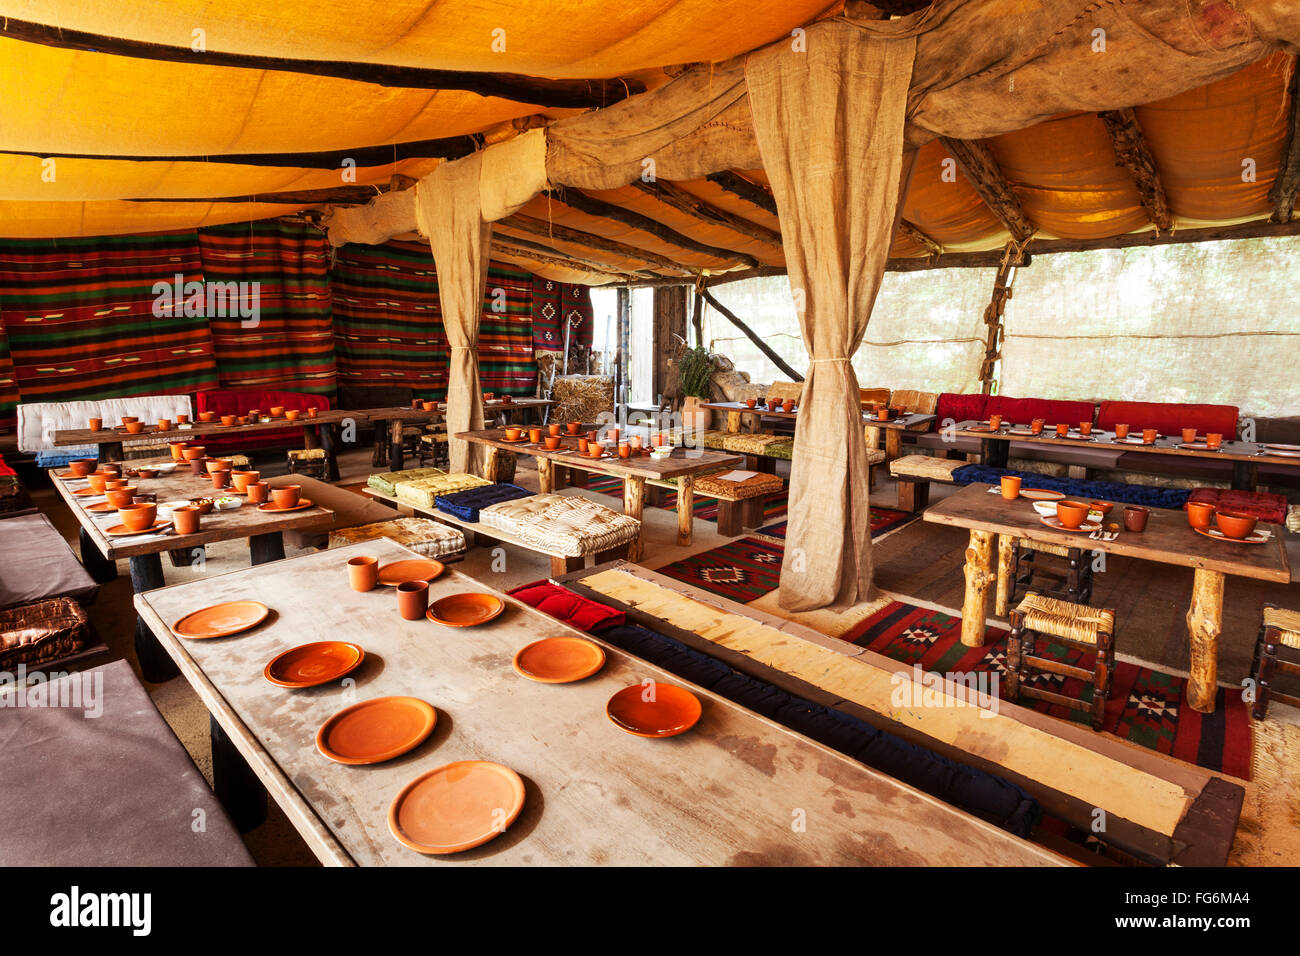 Dining hall with set tables; Nazareth, Israel Stock Photo